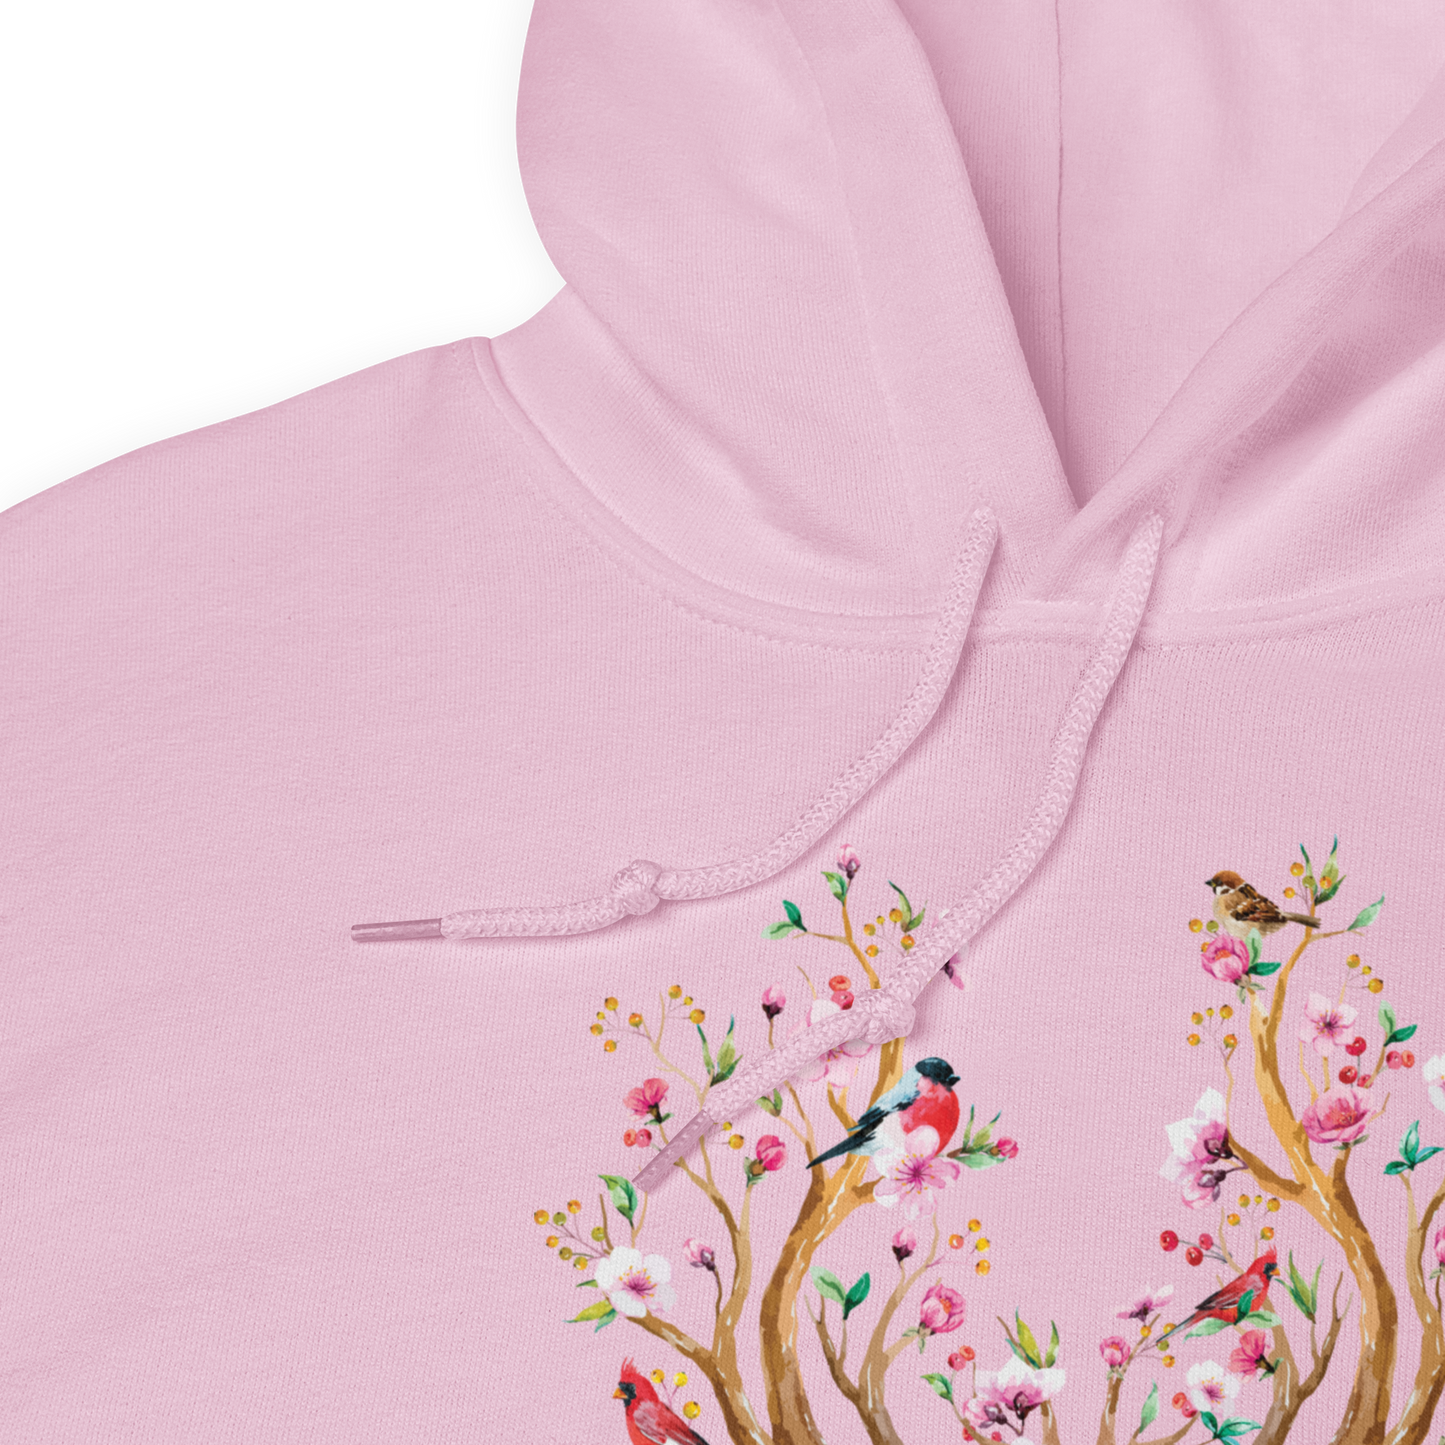 Product details of a Light Pink Floral Red Deer Hoodie featuring a captivating Floral Red Deer graphic on the chest - Cute Graphic Deer Hoodies - Boozy Fox